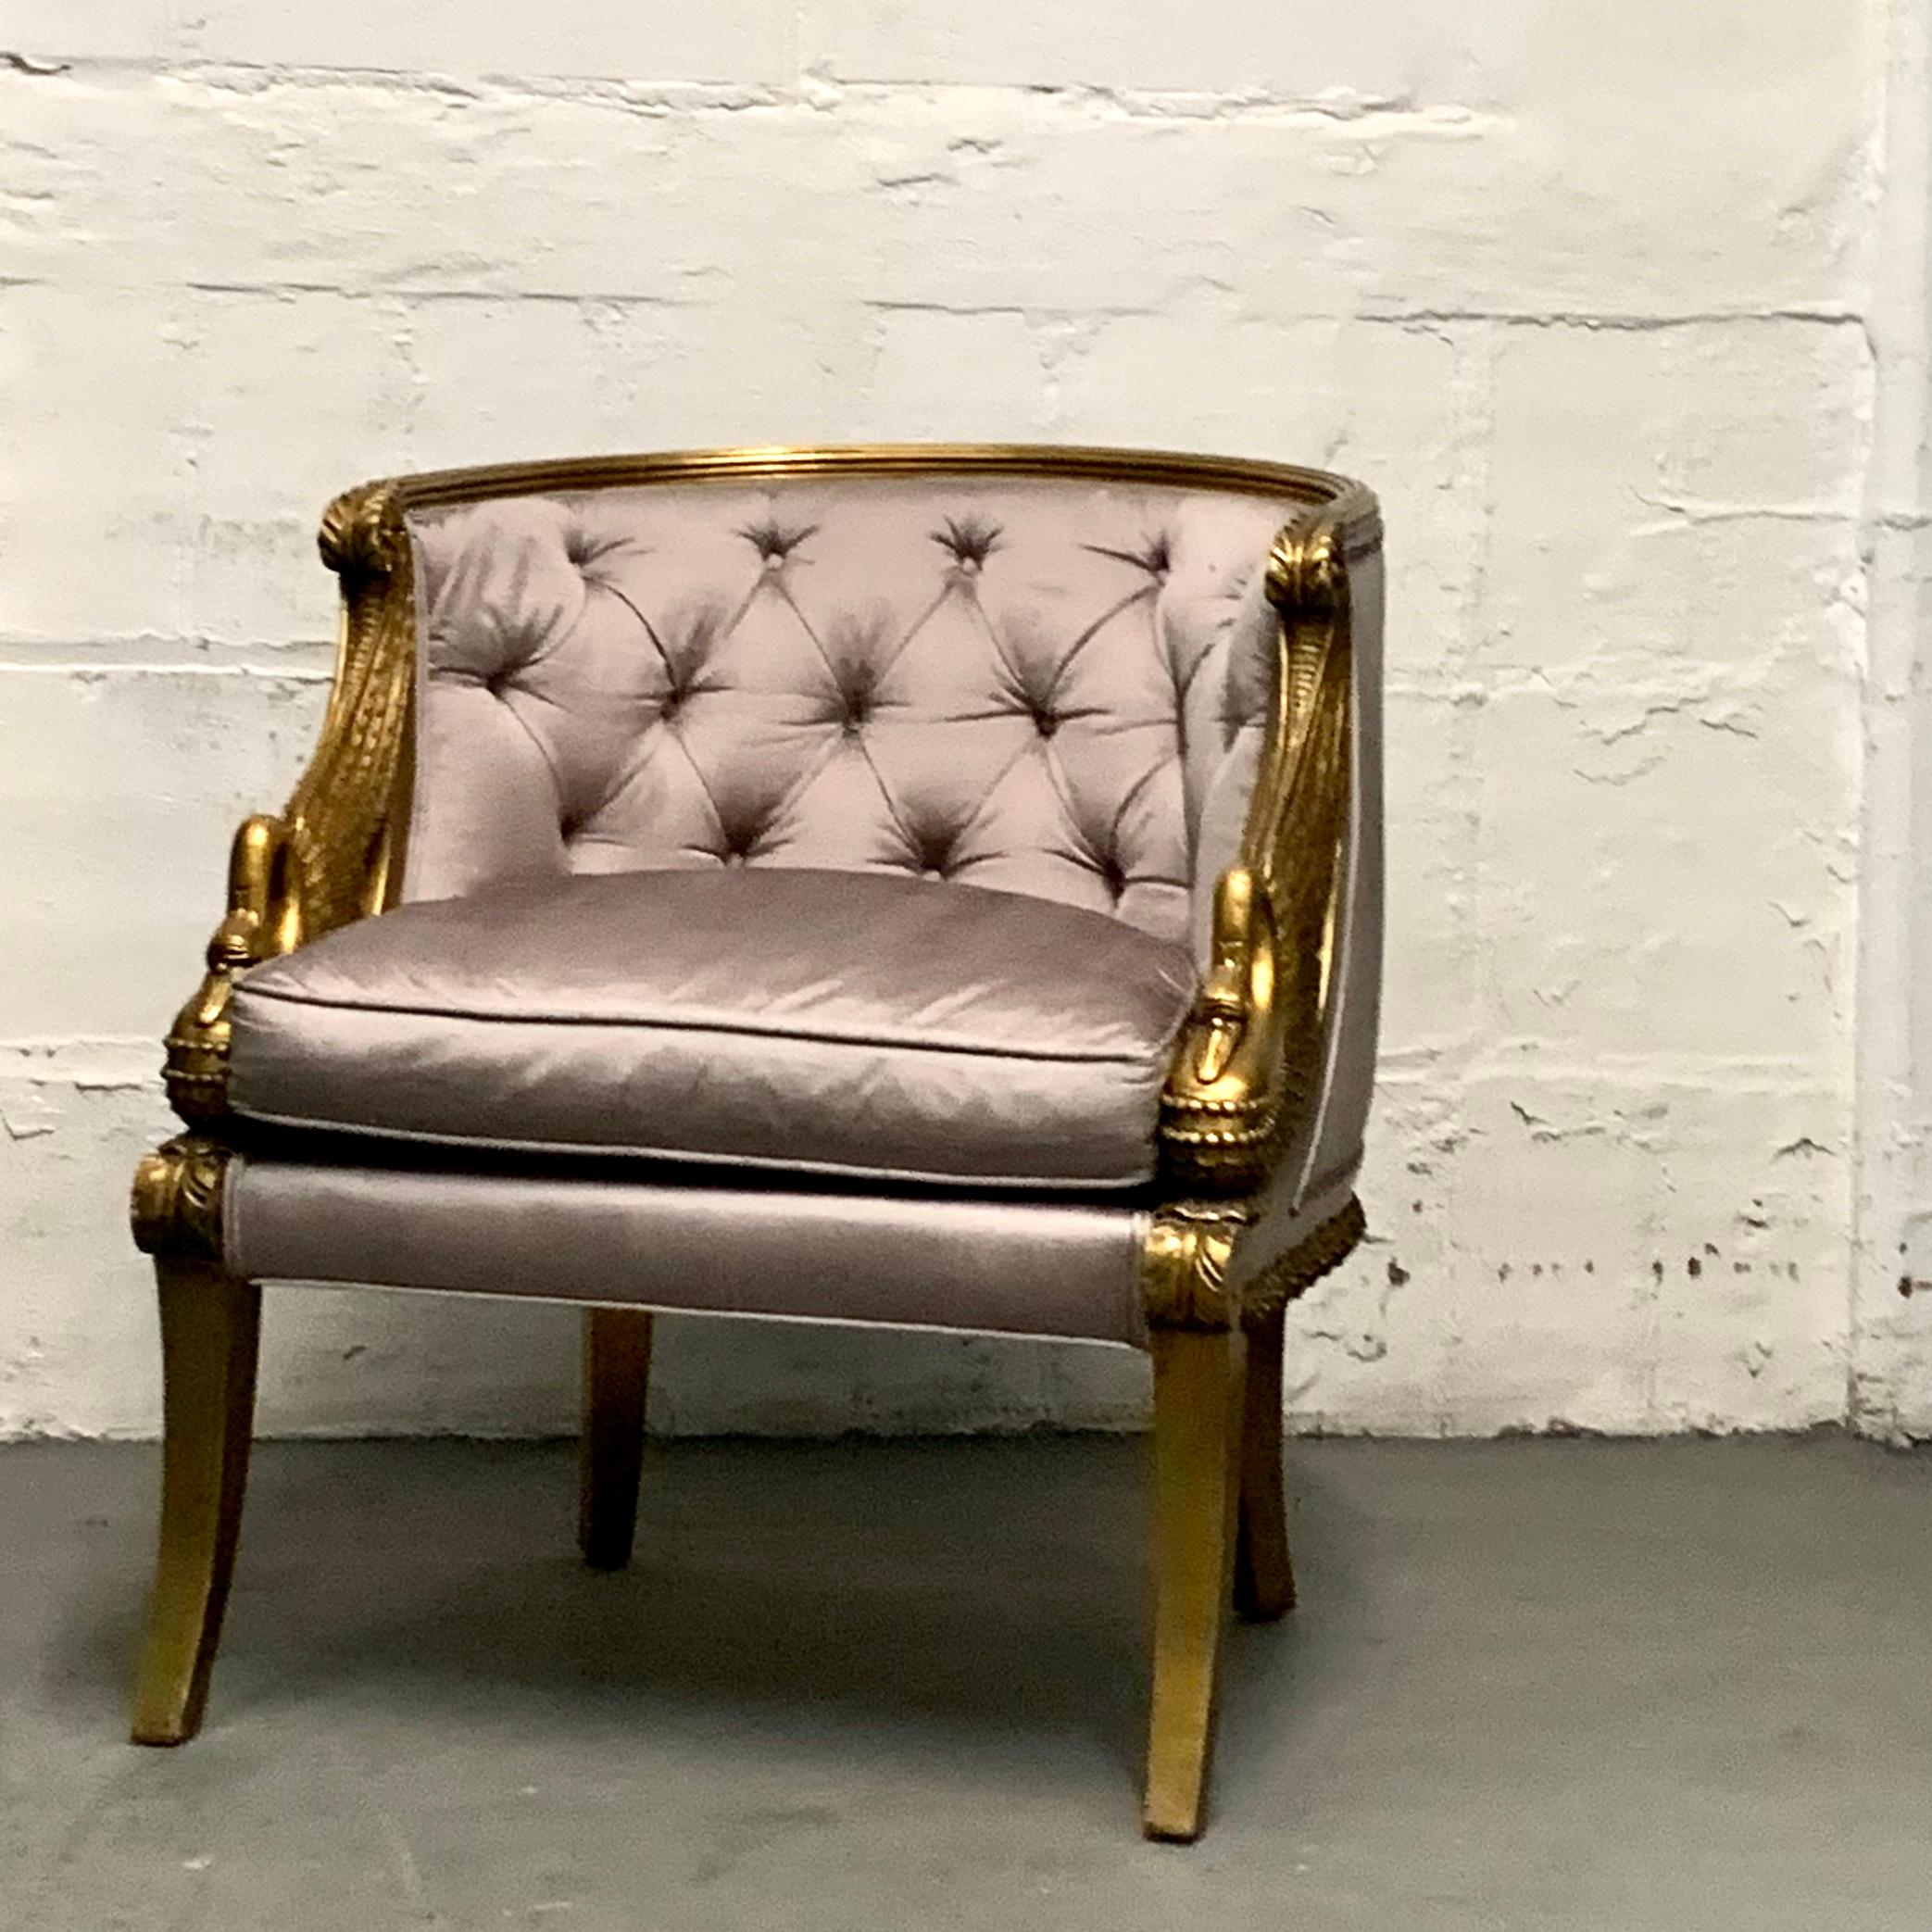 Empire style gilt gondola chair after the iconic design (1803) by the Jacob Frères for Empress Joséphine, Swans, Kravet couture raw silk.

The Jacob Frères most famous client was Josephine, wife of Napoleon Bonaparte. She used them to decorate